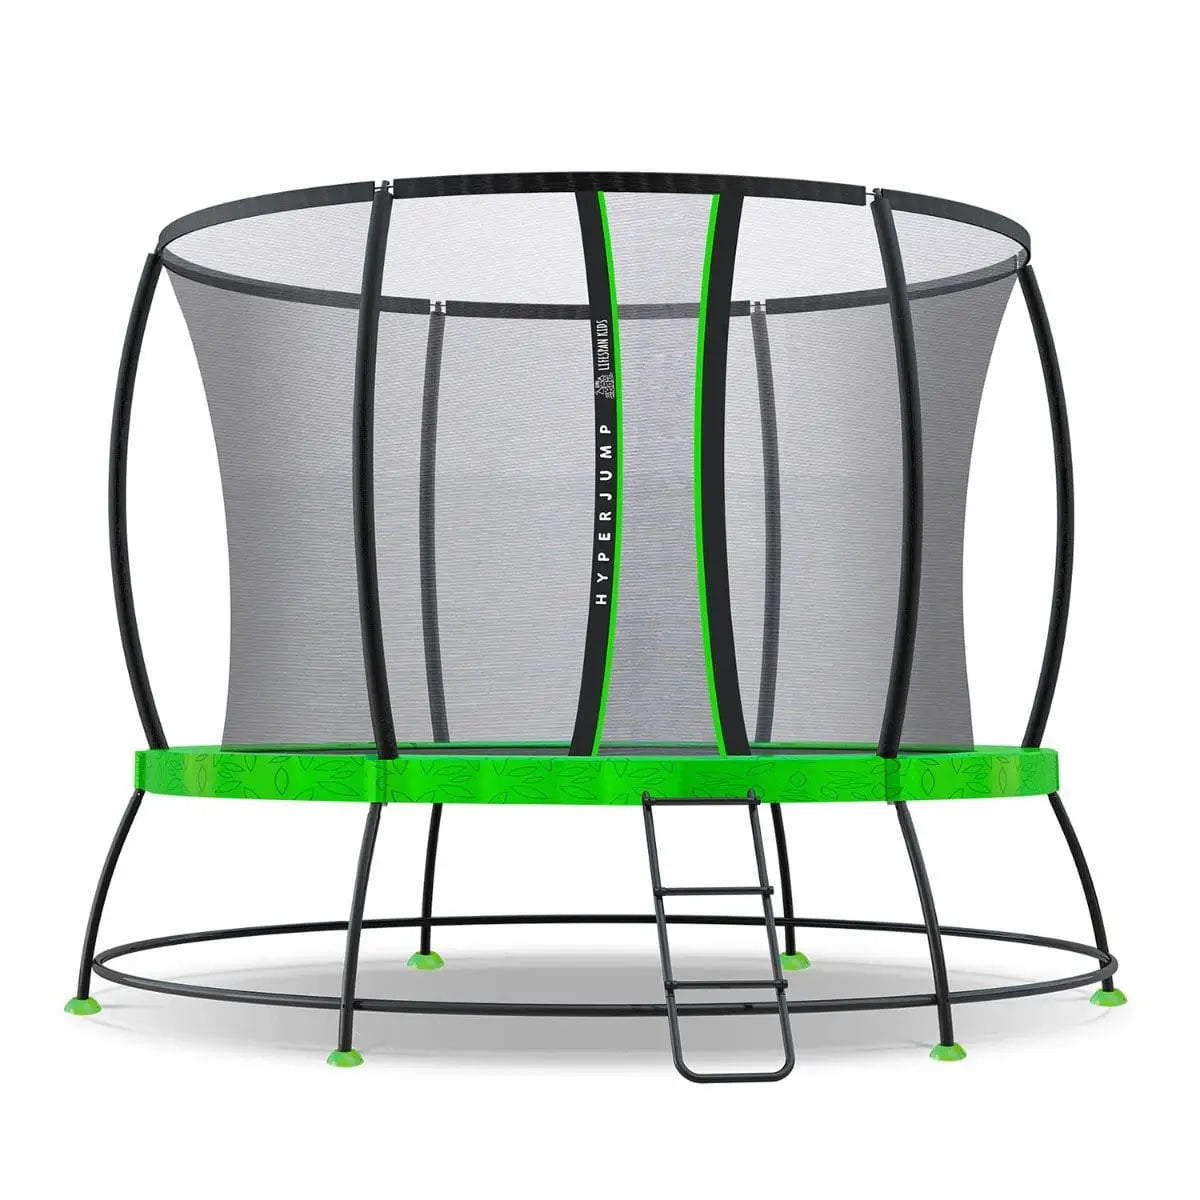 Bounce into Fun: Our Range of Trampolines